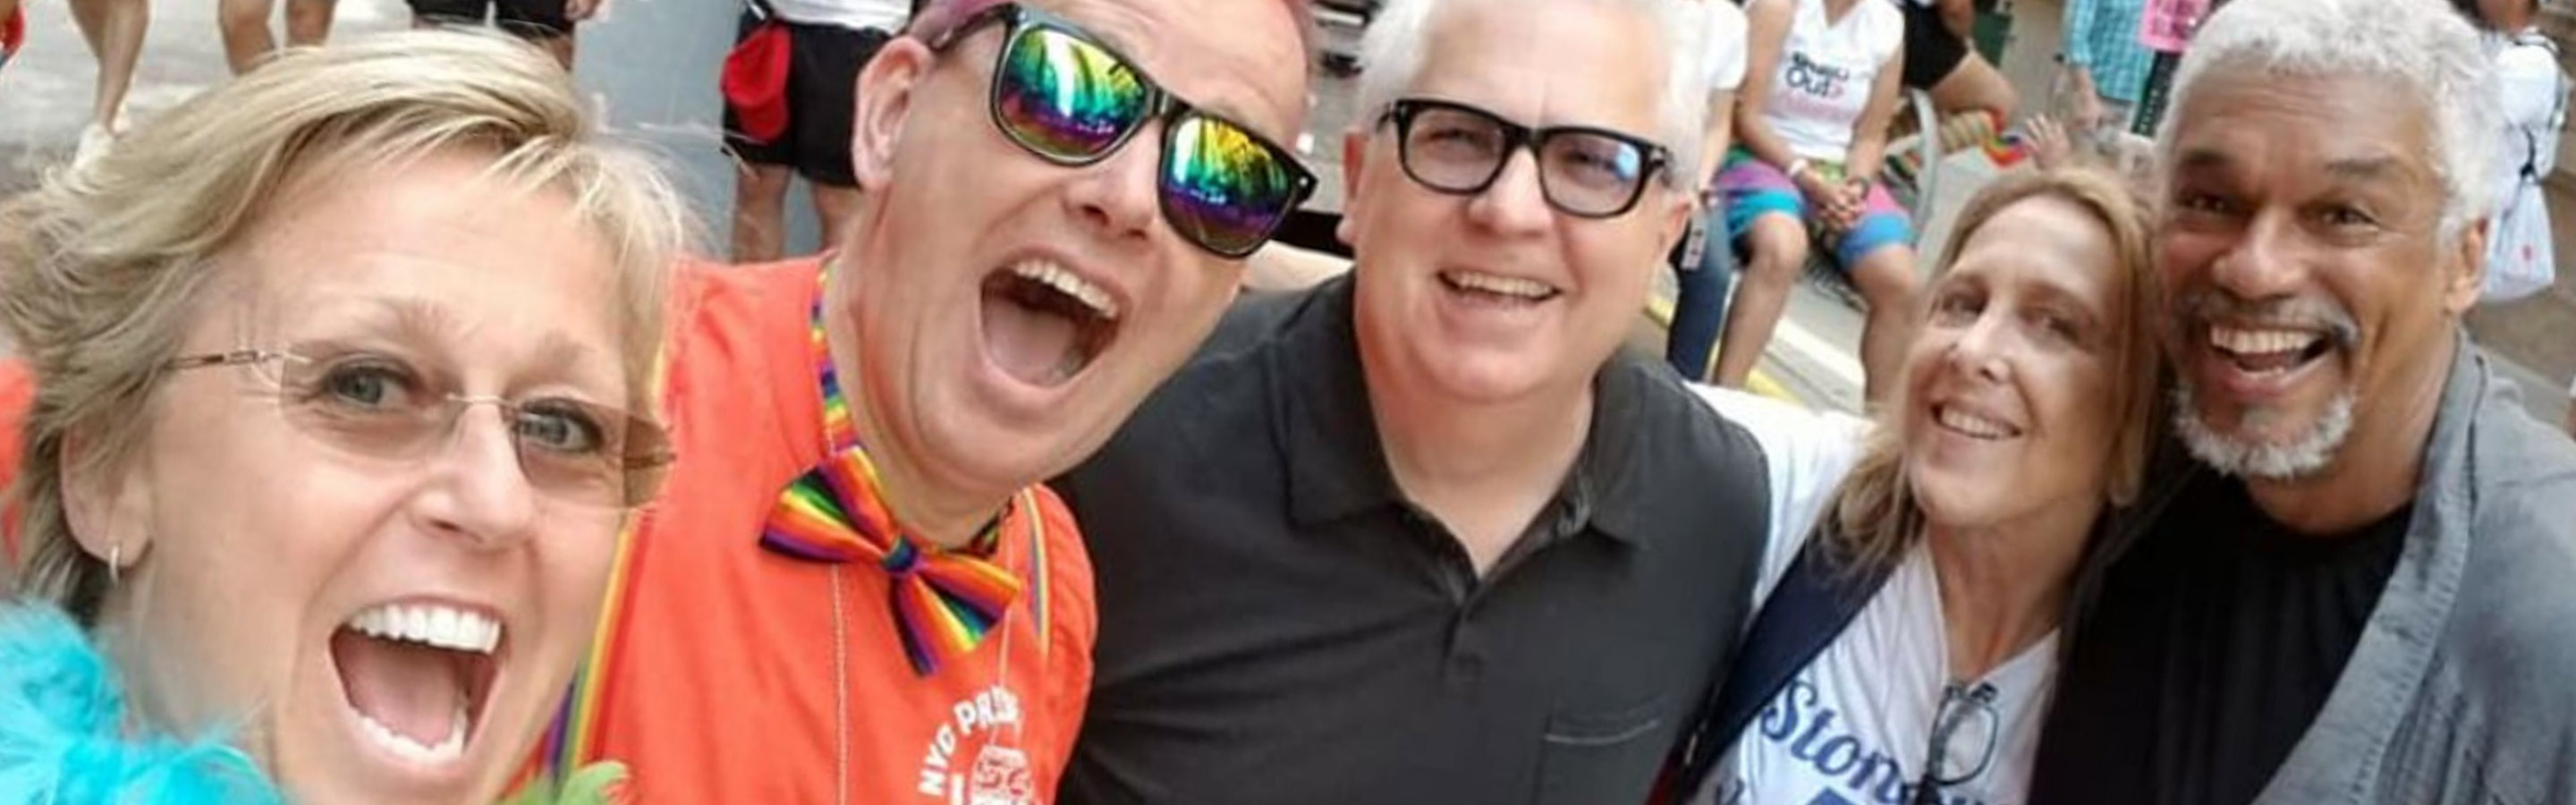 People celebrate together at a Pride Month parade